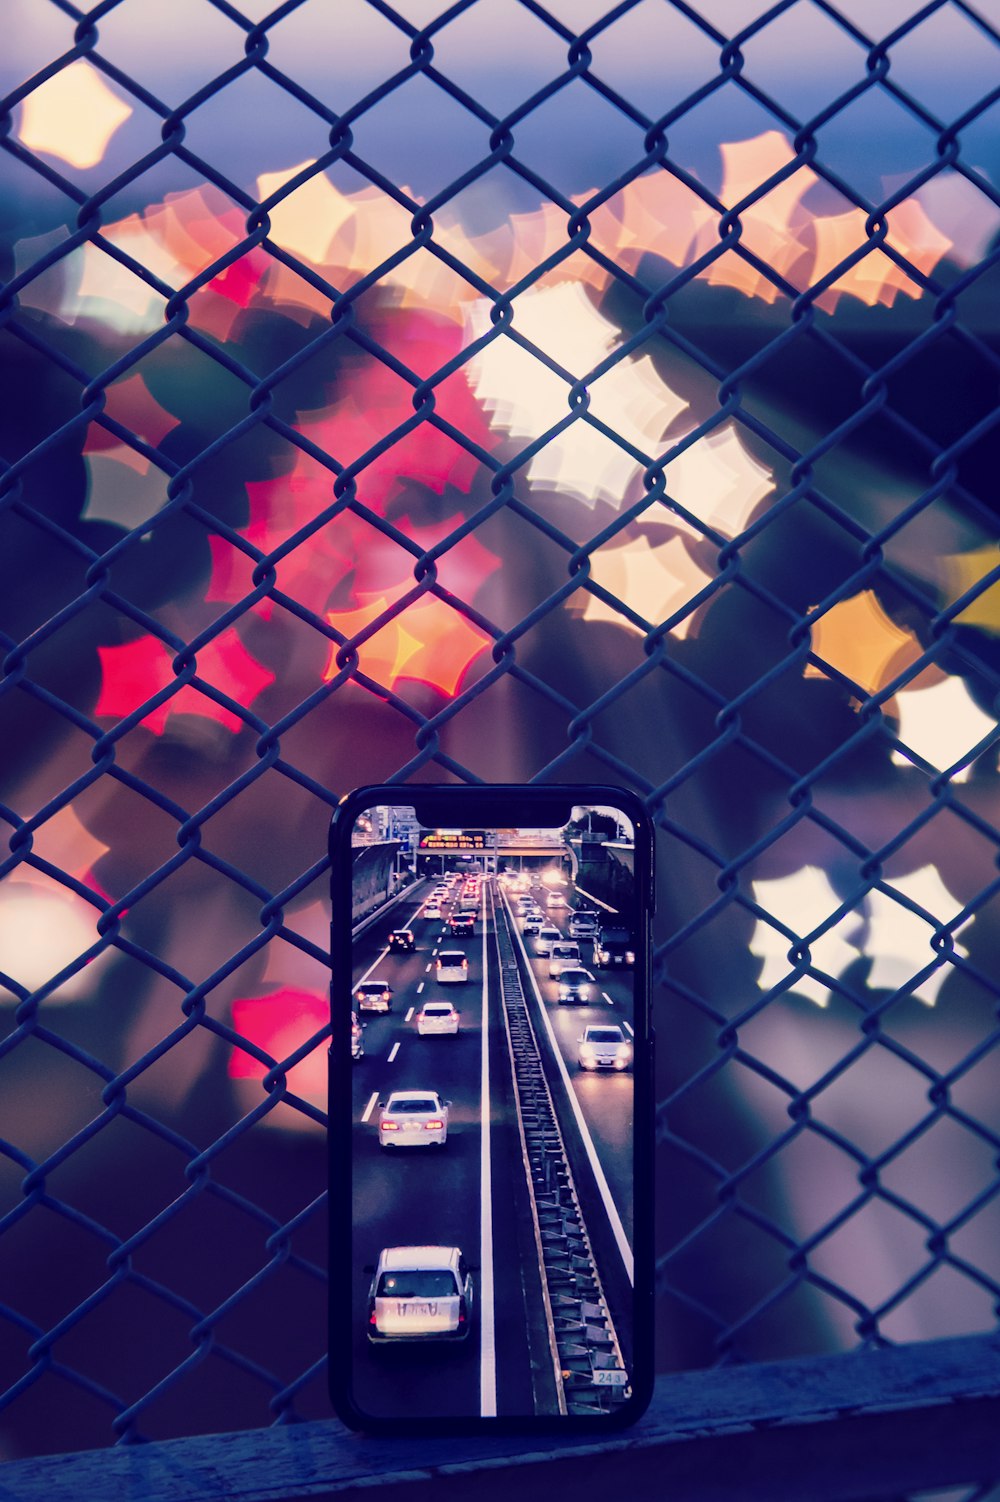 smartphone leaning on grey wired fence capturing vehicles on road